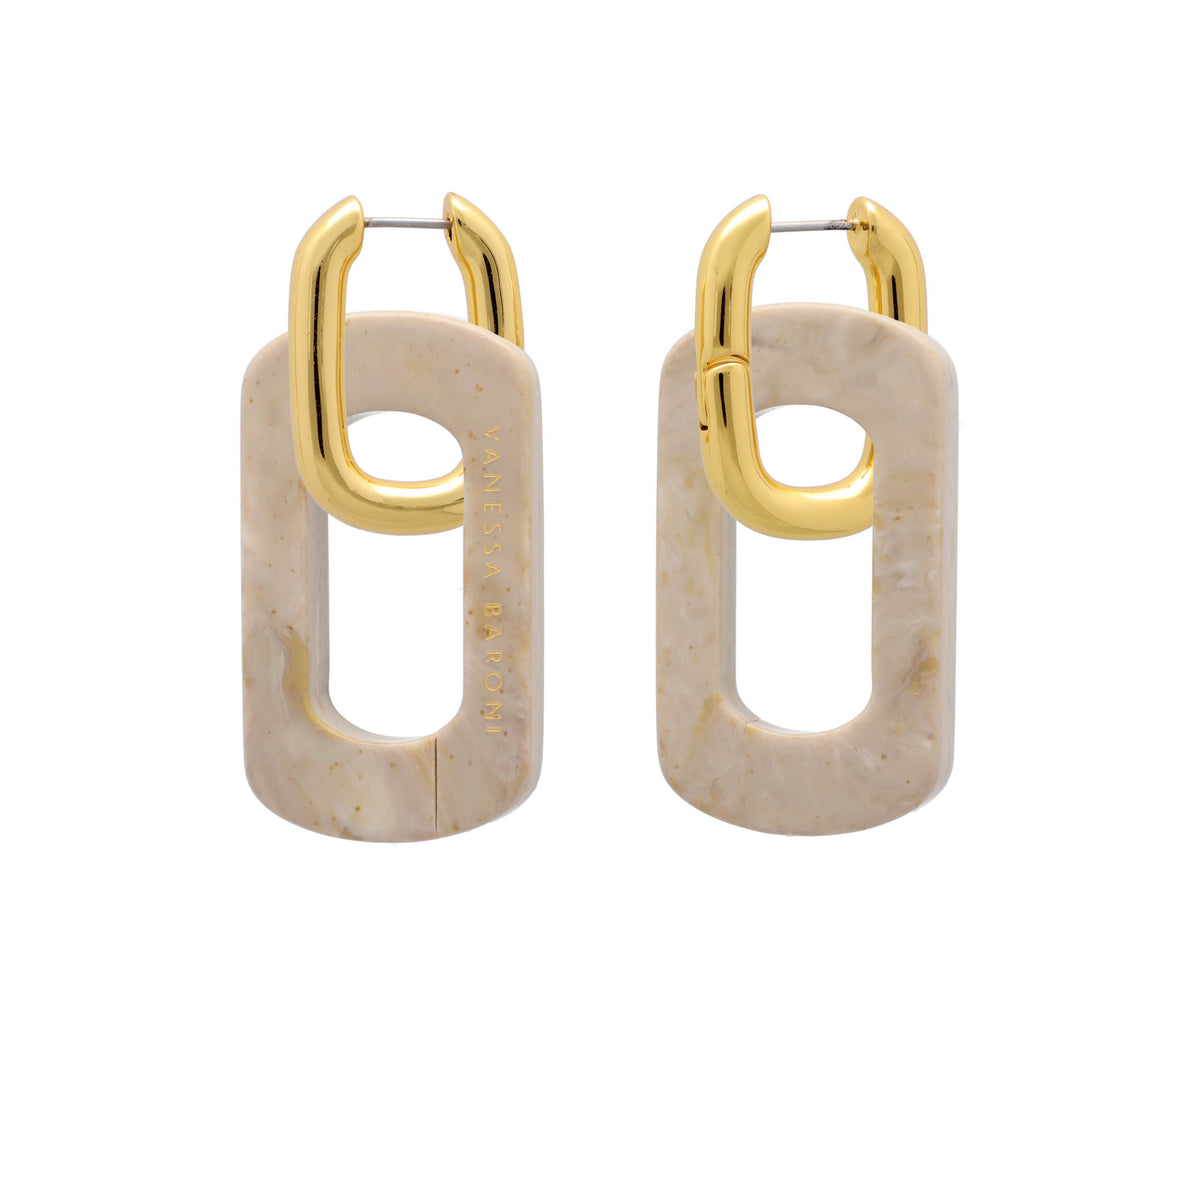 Edge with gold Earring Travertine